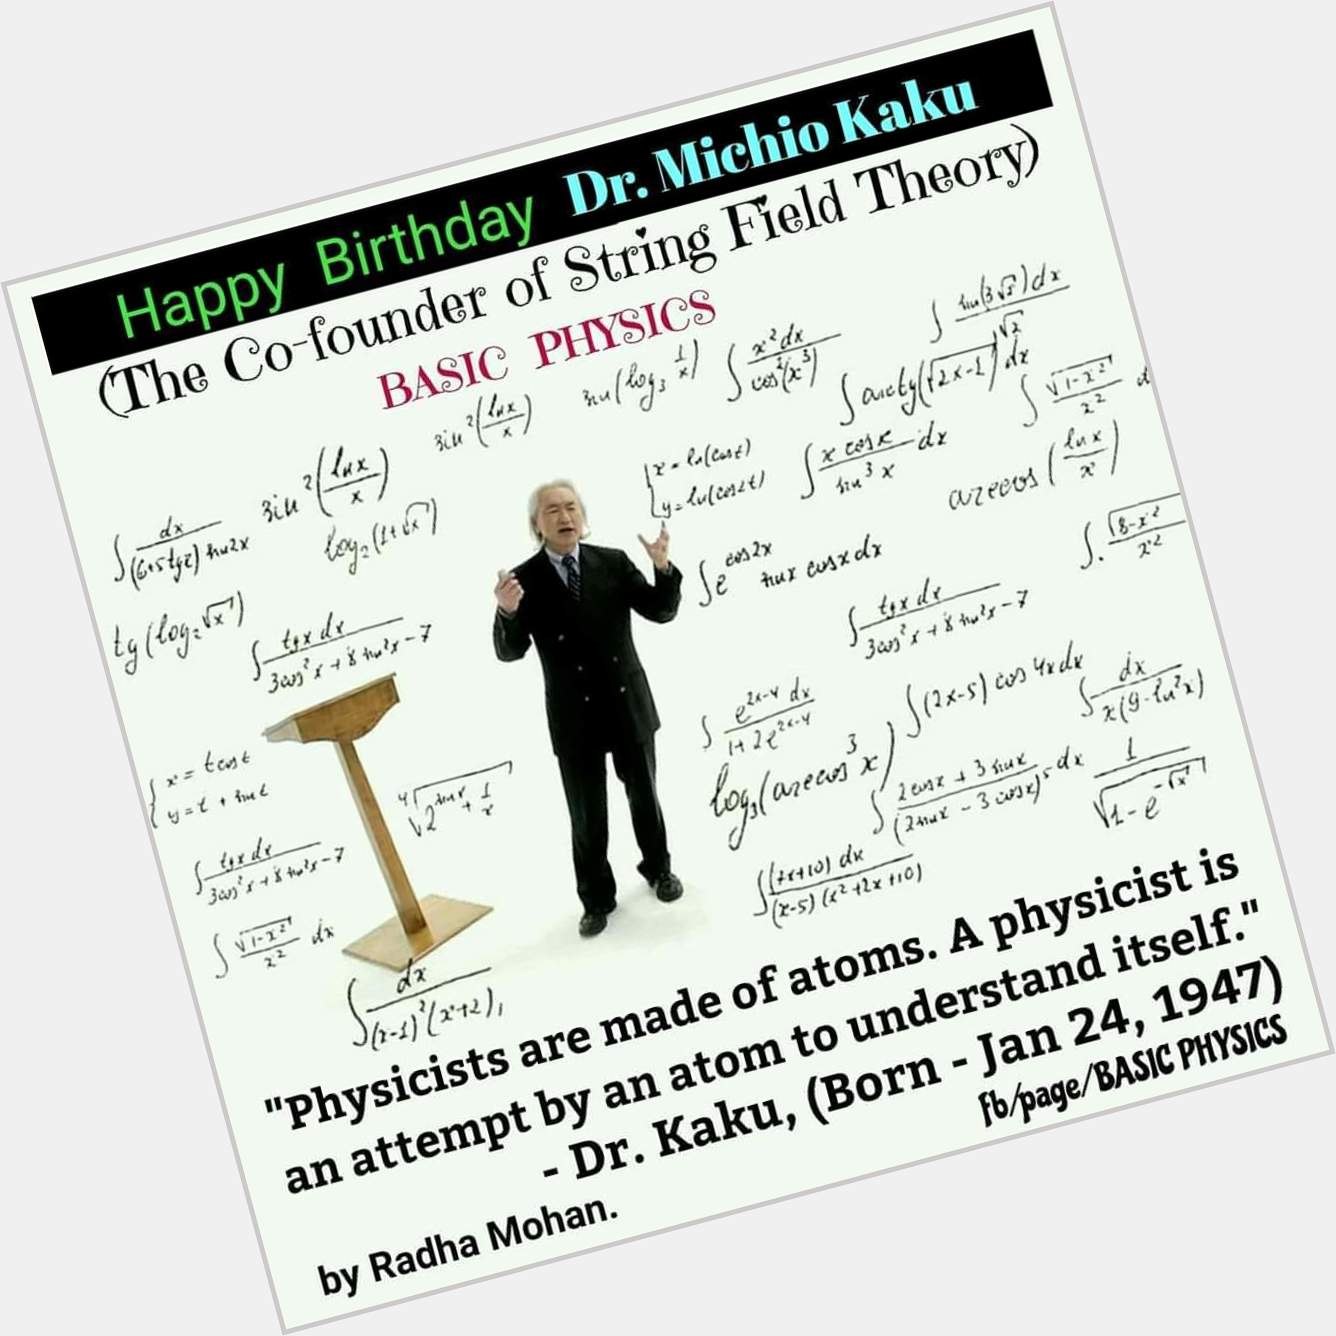 Happy Birthday Dr. MICHIO KAKU THANK YOU FOR ALL THE GREAT THINGS YOU TOLD ME  YOURS
Veit Schwiertz 